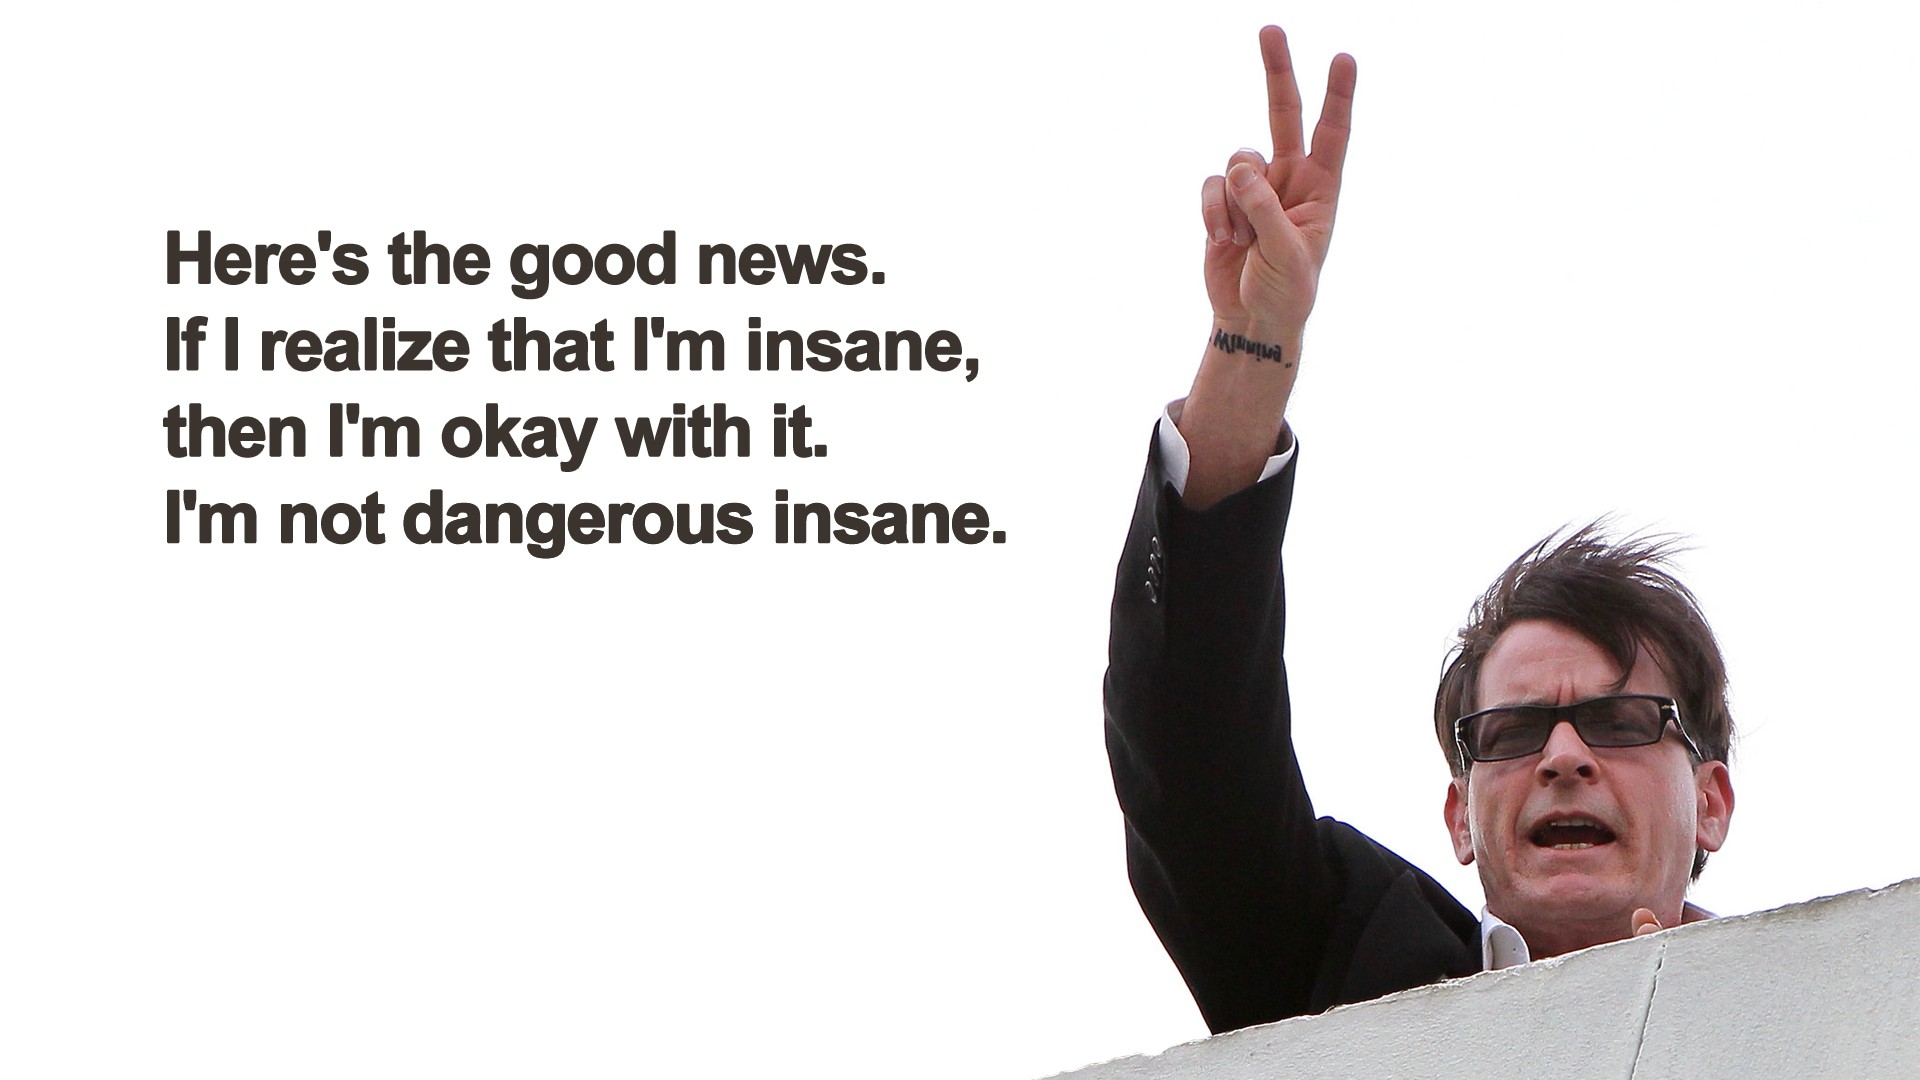 quotes, peace, funny, insane, Charlie Sheen, Two and a Half Men, V sign - desktop wallpaper